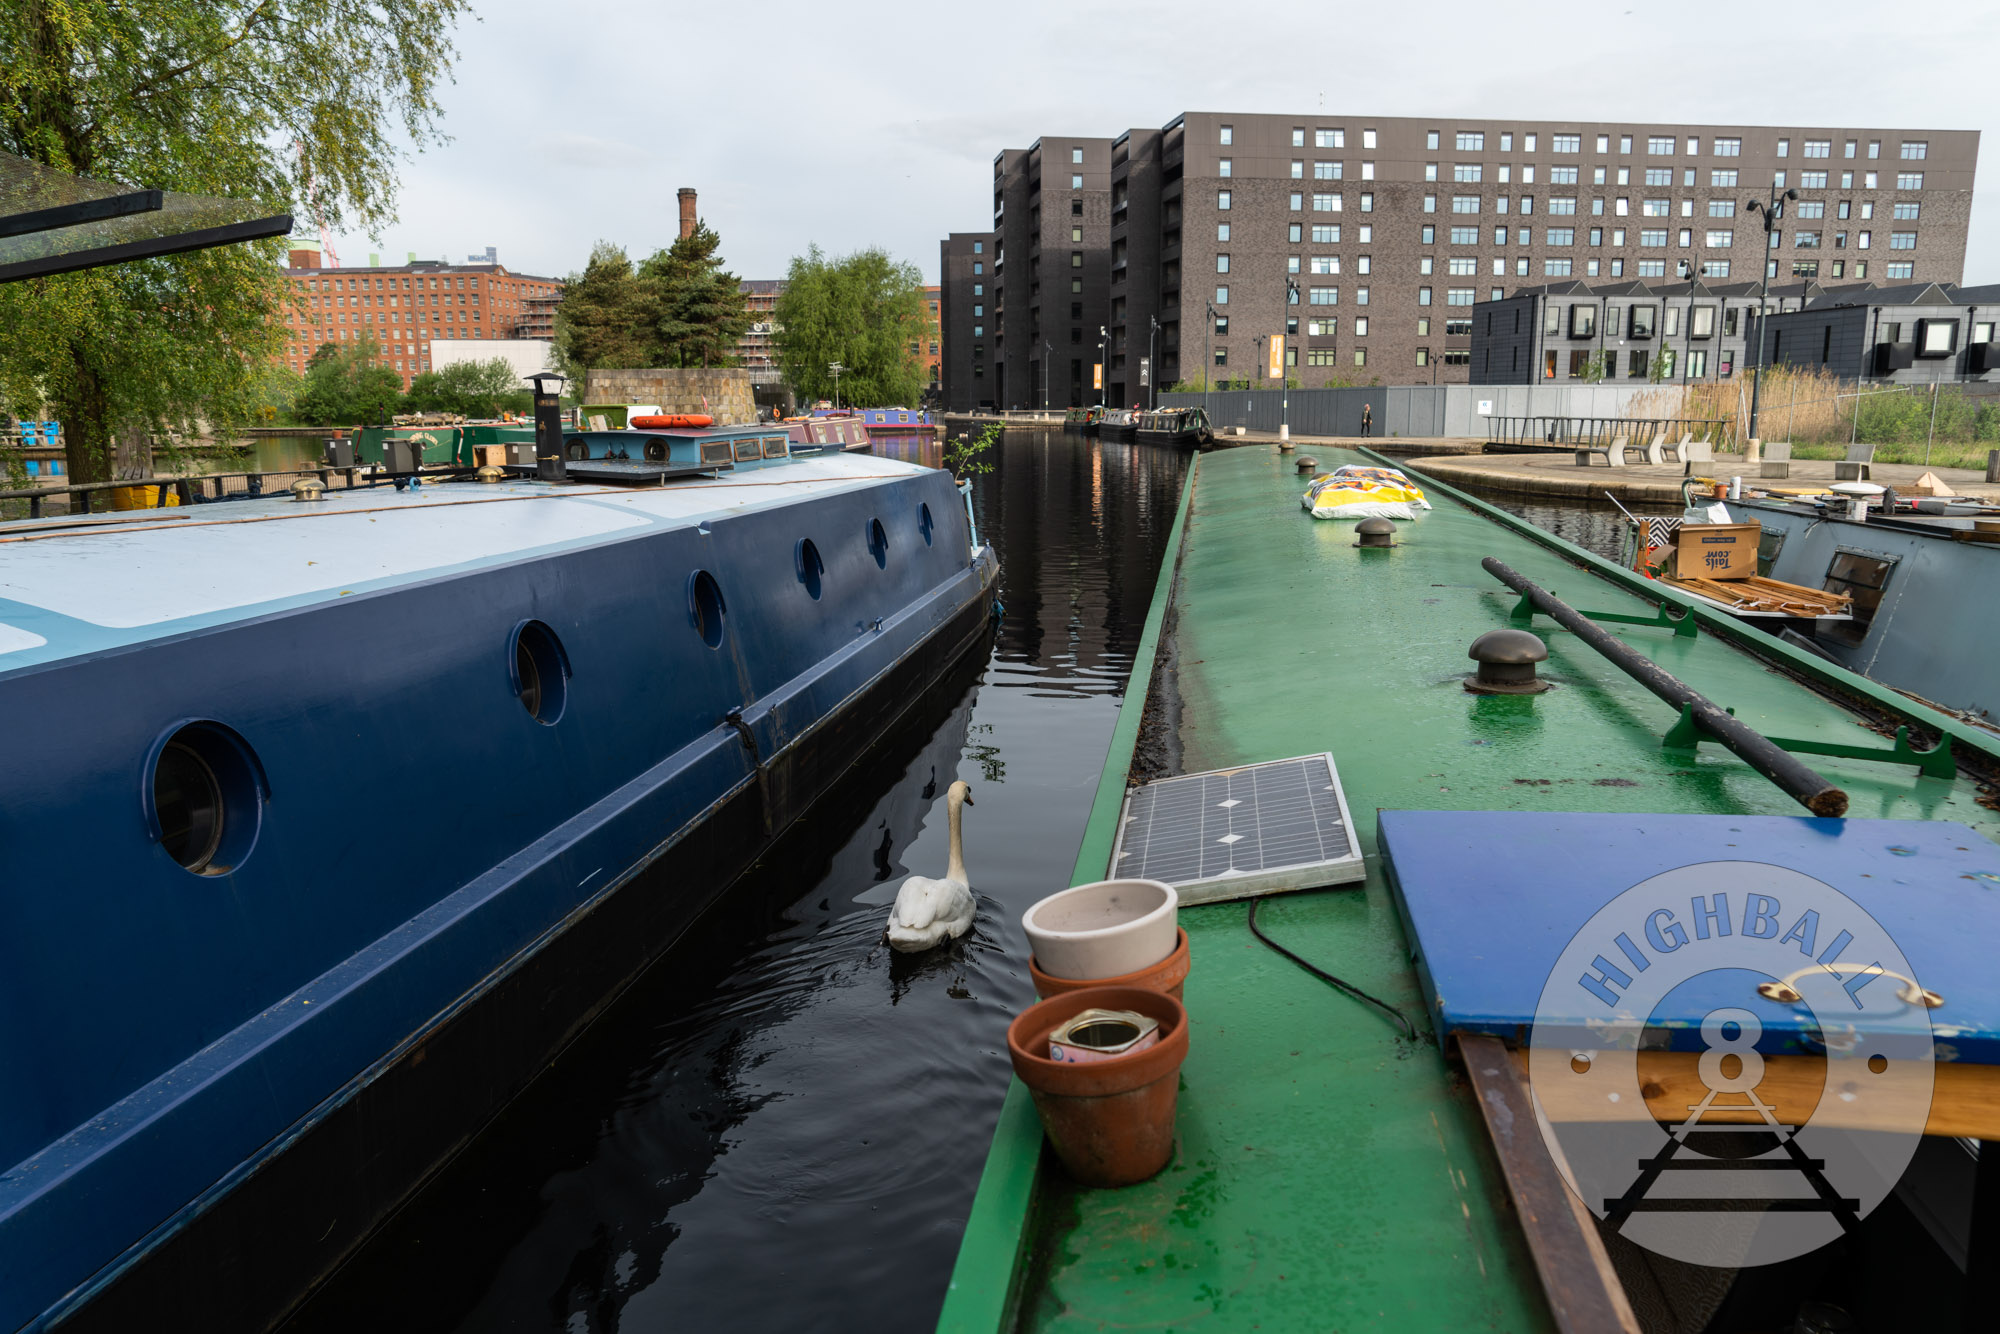 Canal boats in a marina, with a goose, New Islington, Manchester, UK, 2018.